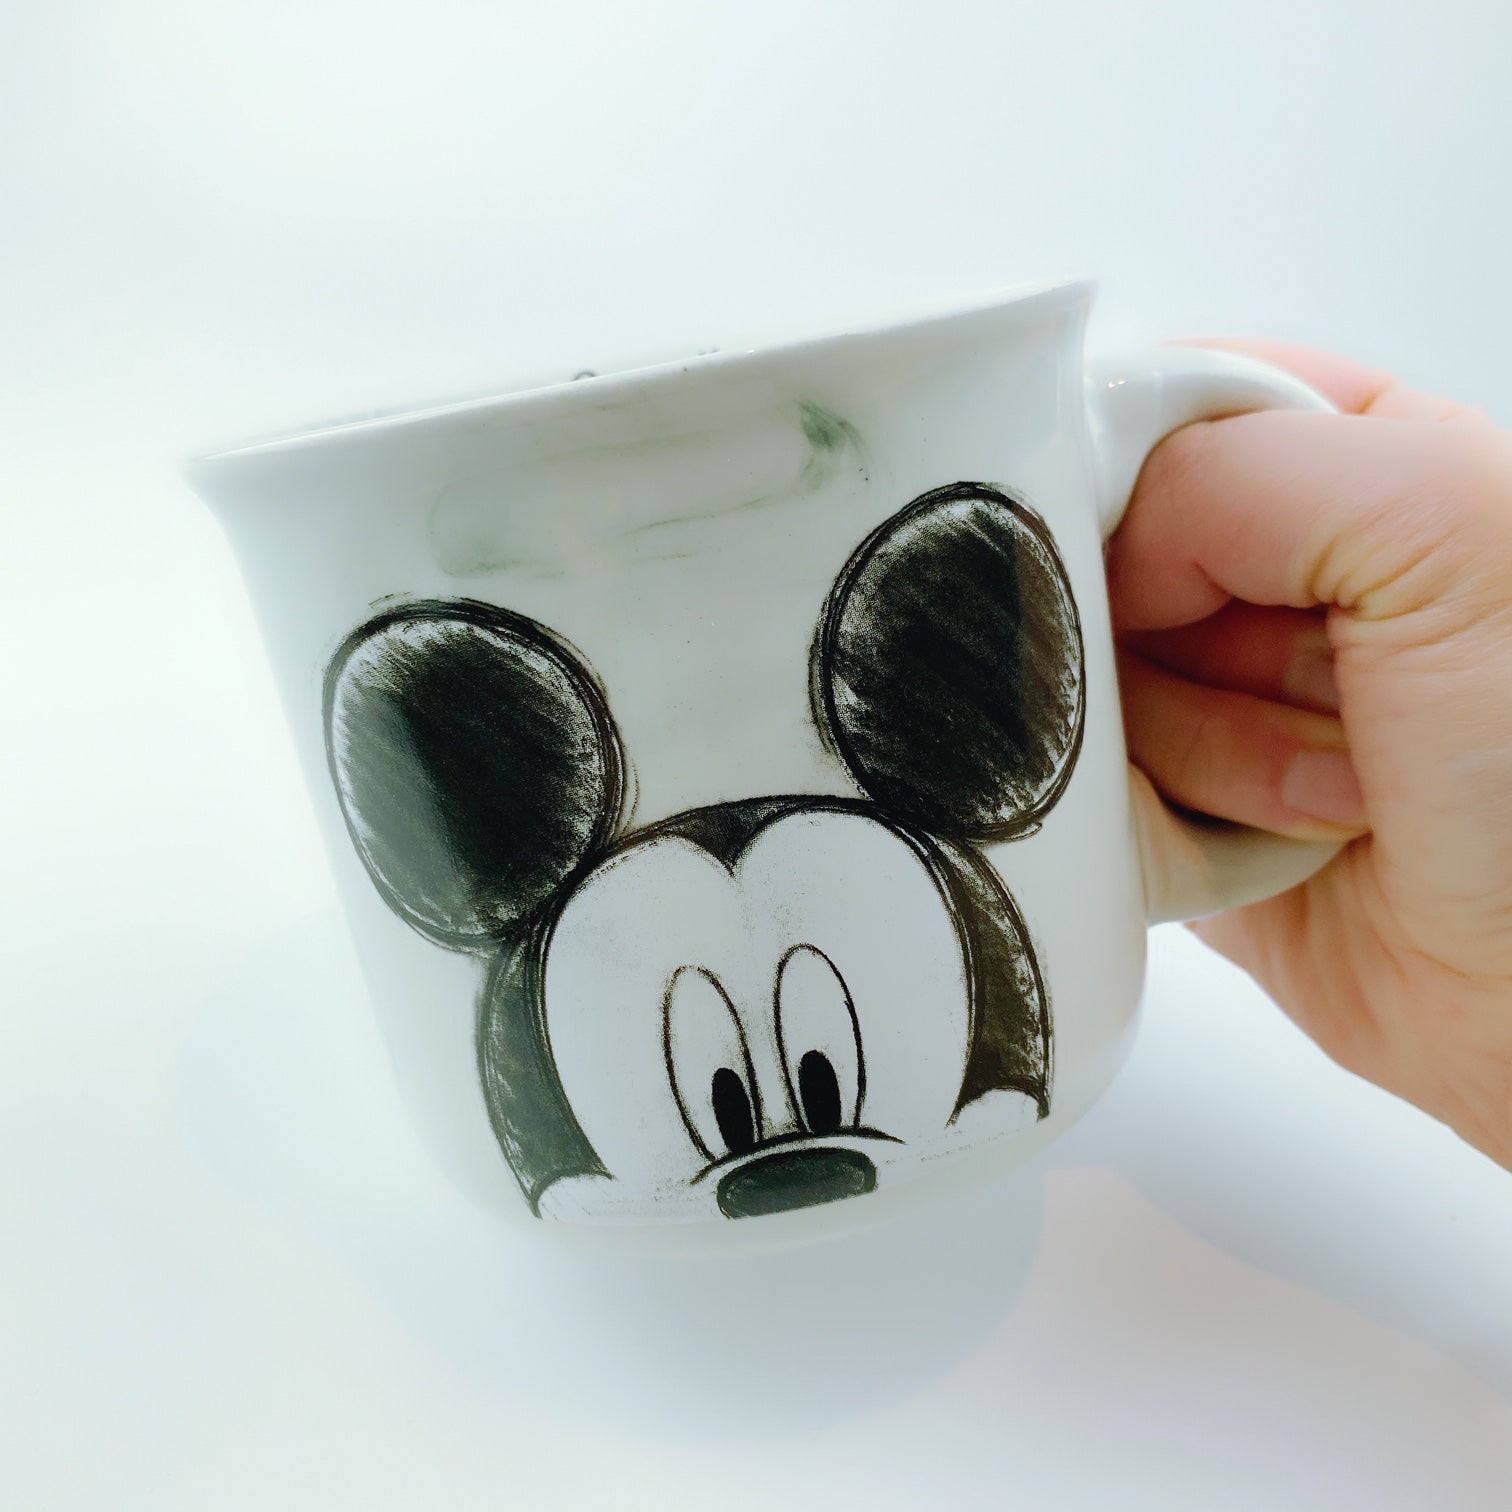 Mickey and Minnie Mouse Perfect Match Ceramic Coffee Mug Holds 20 Ounces